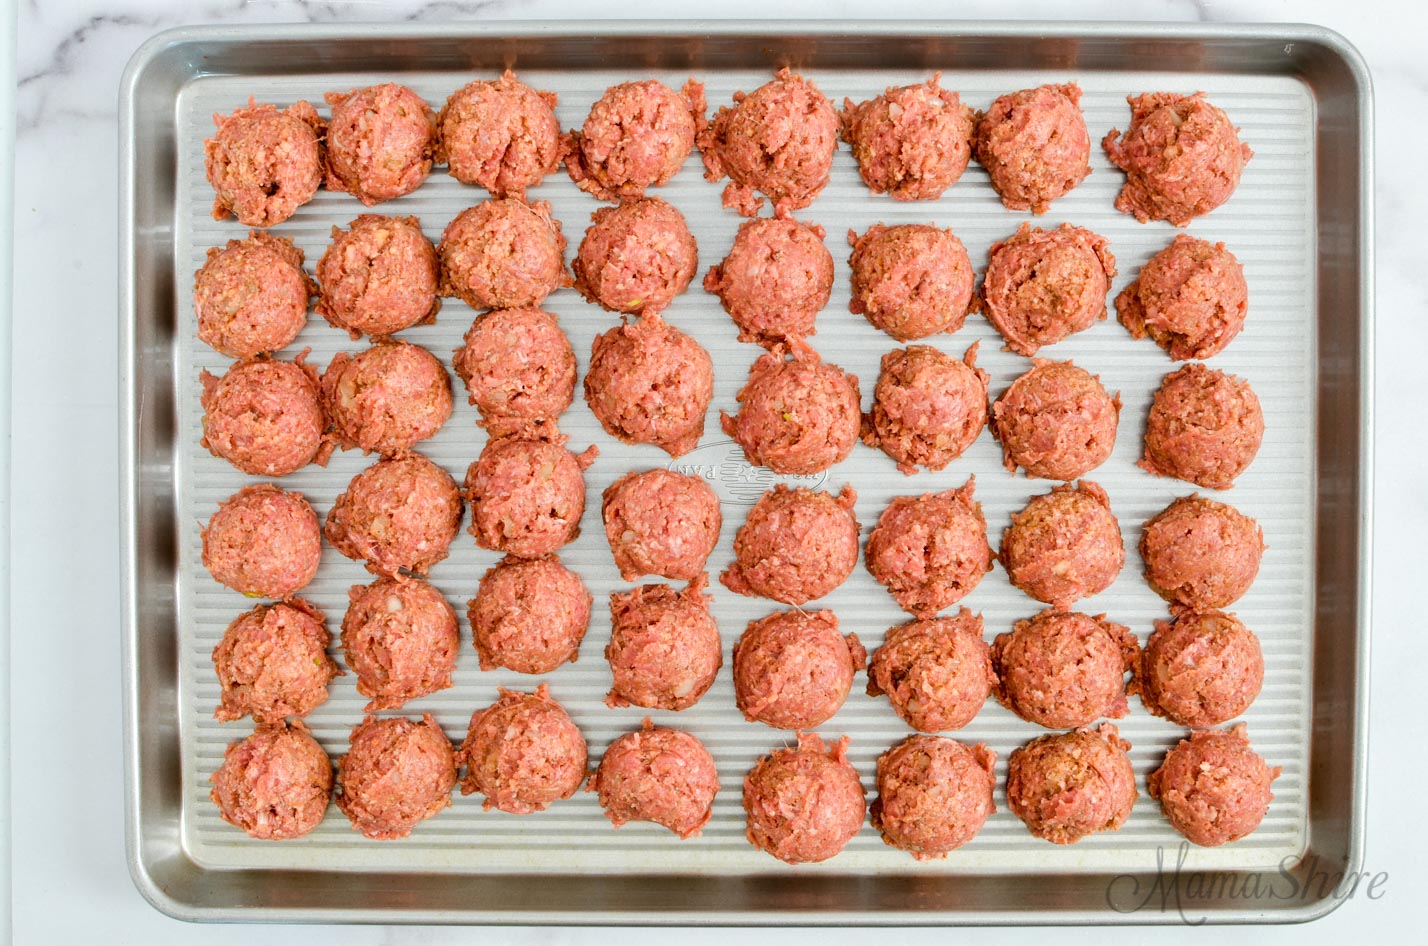 A pan of gluten-free meatballs ready to bake or freeze.